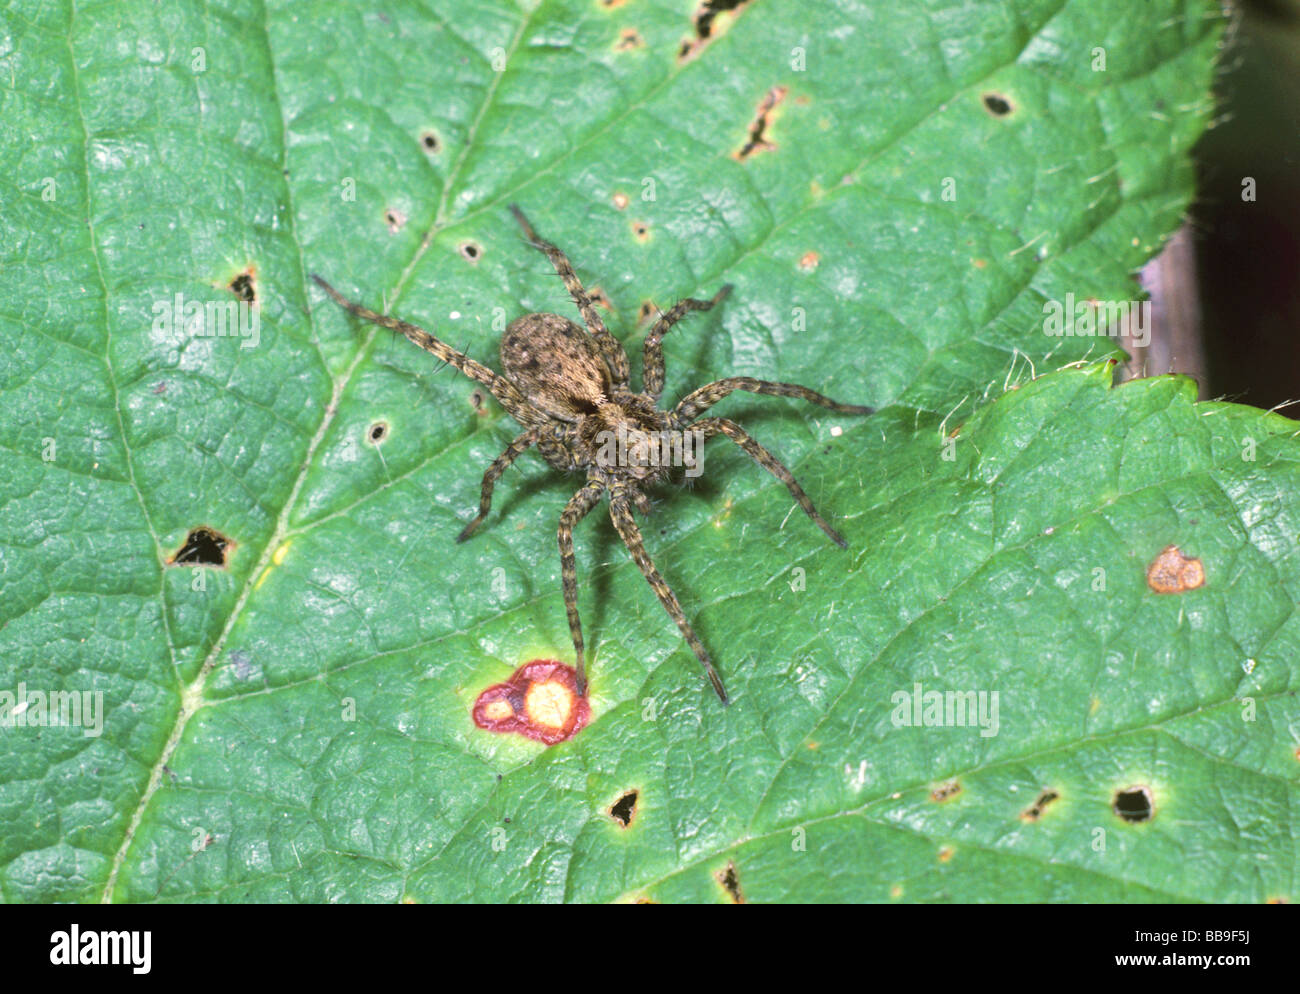 portrait of spotted wolf spider Pardosa amentata germany Stock Photo